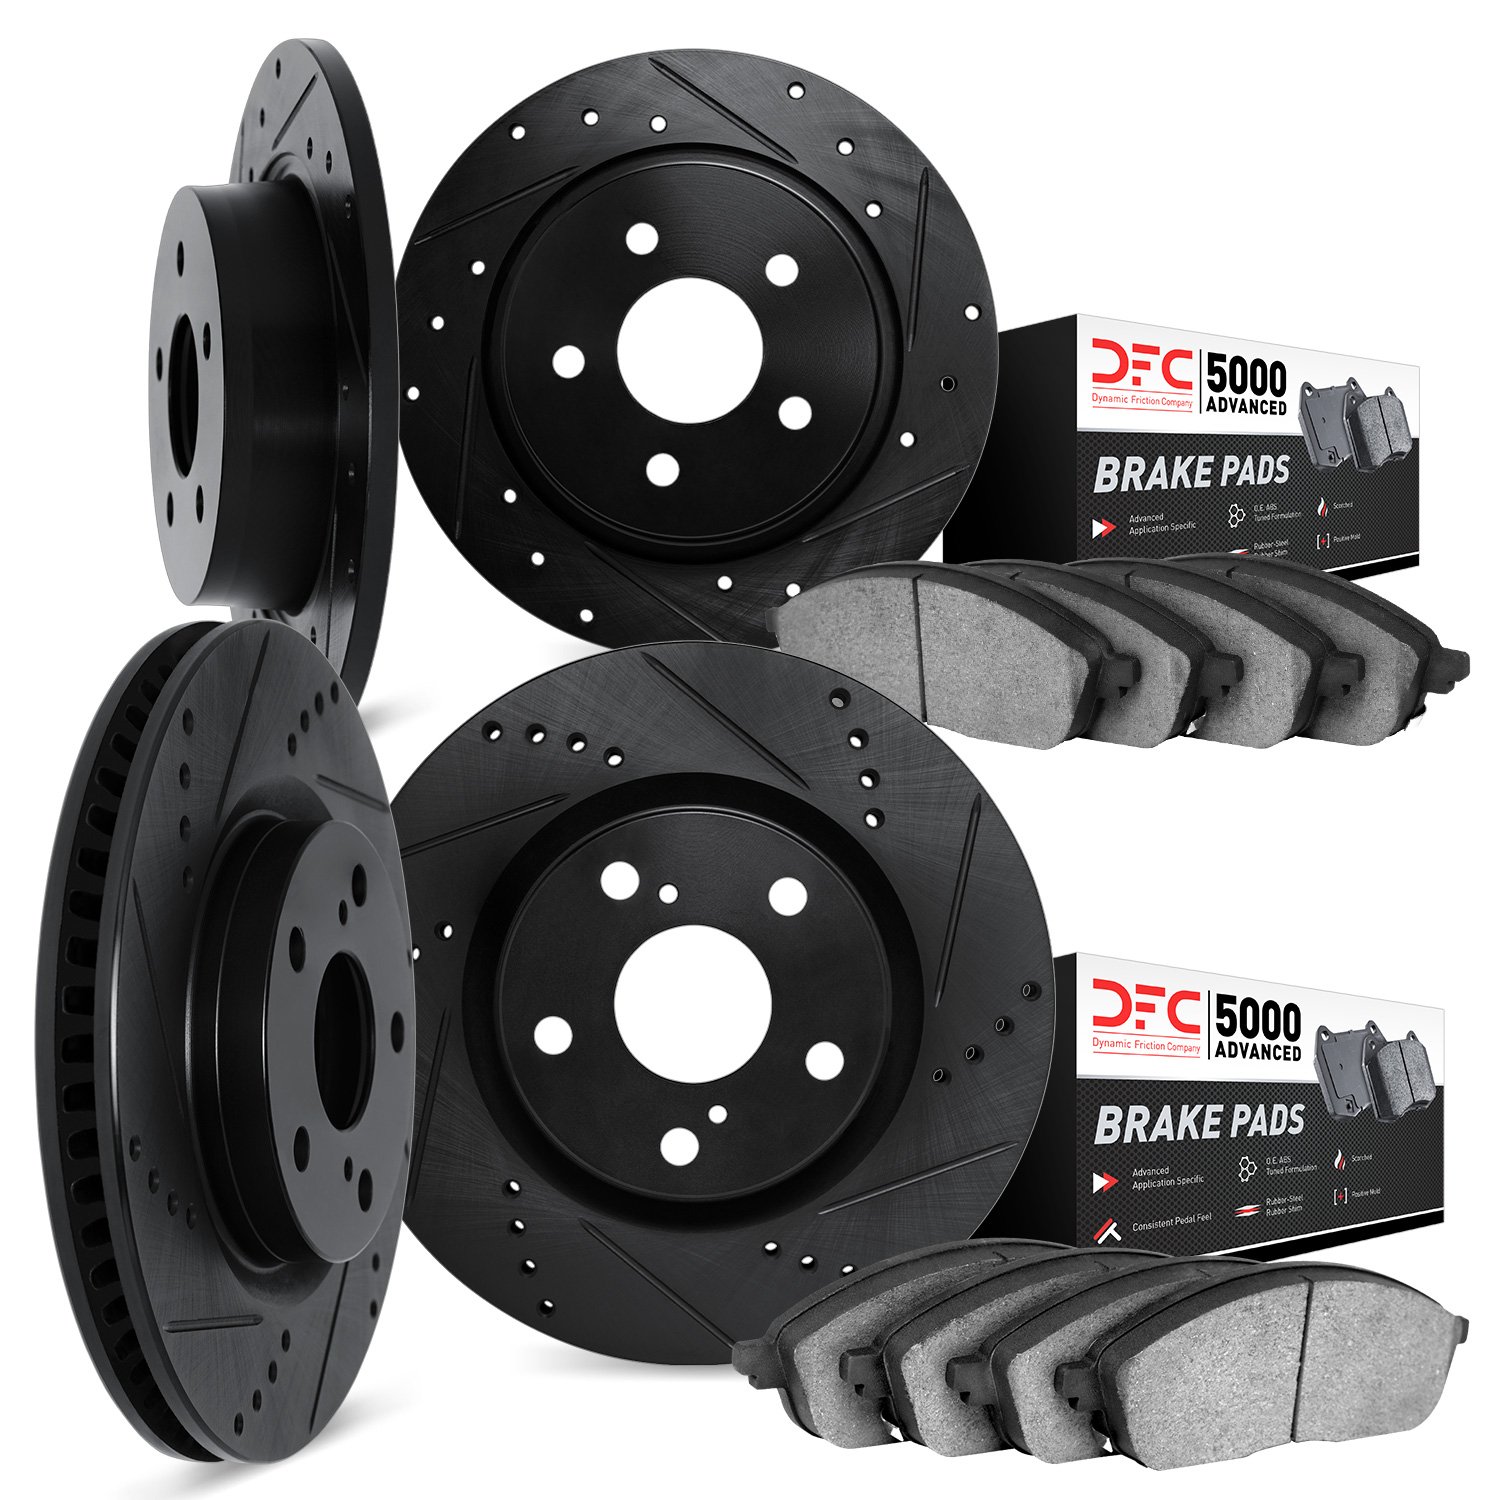 8504-76132 Drilled/Slotted Brake Rotors w/5000 Advanced Brake Pads Kit [Black], 2000-2003 Lexus/Toyota/Scion, Position: Front an